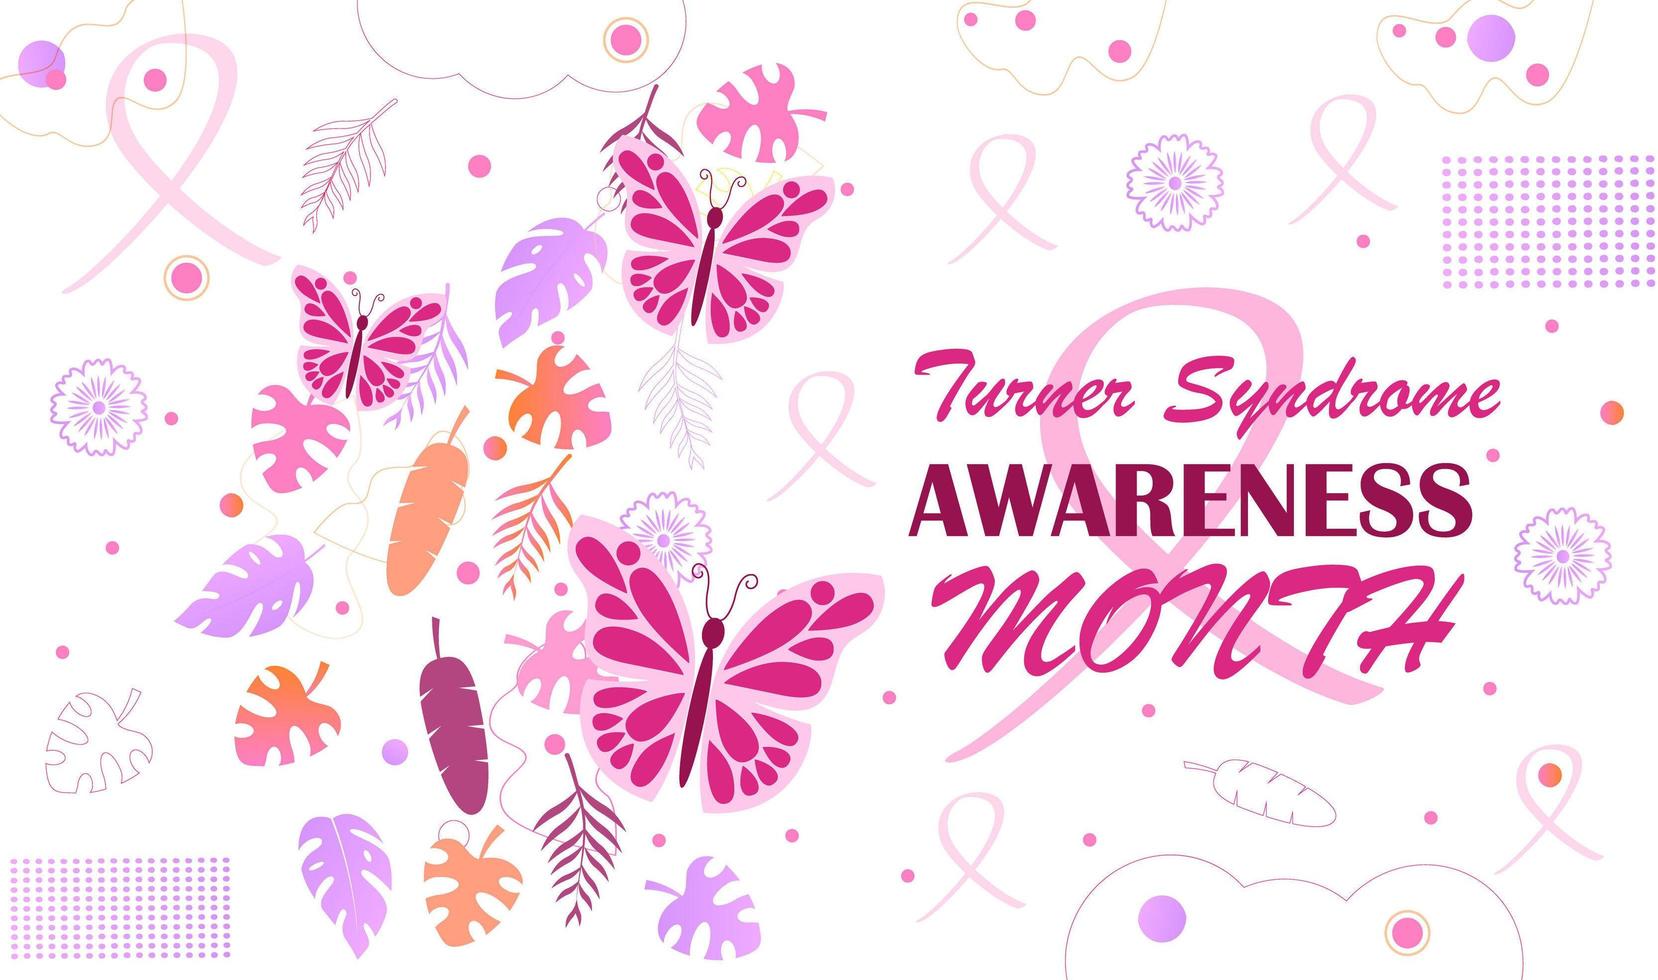 Turner Syndrome awareness month is celebrated in February. Pink butterflies and falling tropical colorful leaves on white background. Crimson ribbon is symbol vector